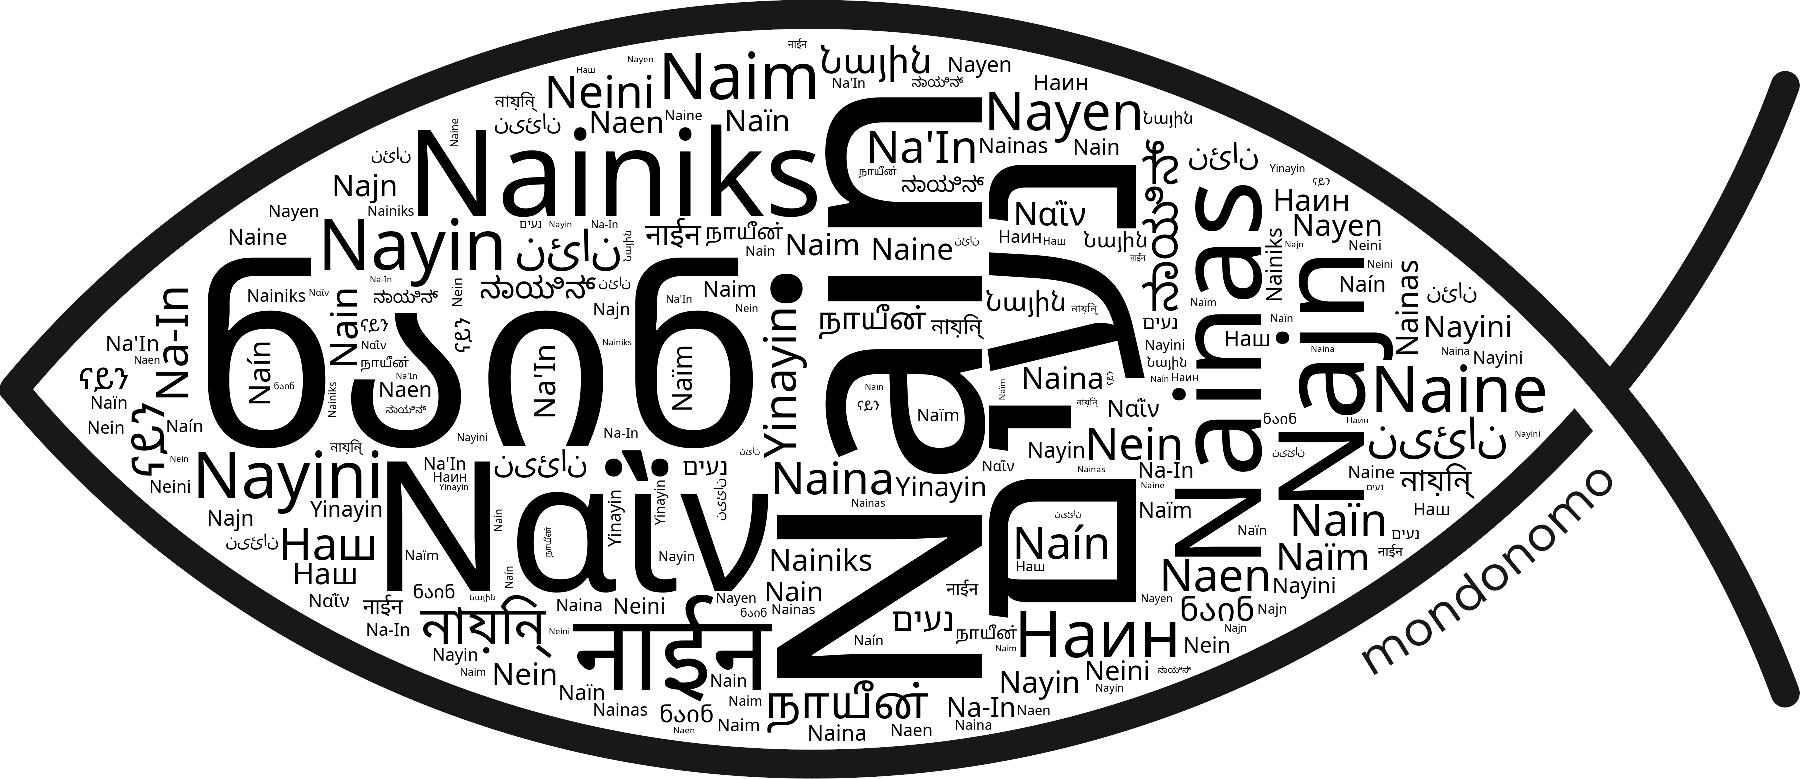 Name Nain in the world's Bibles